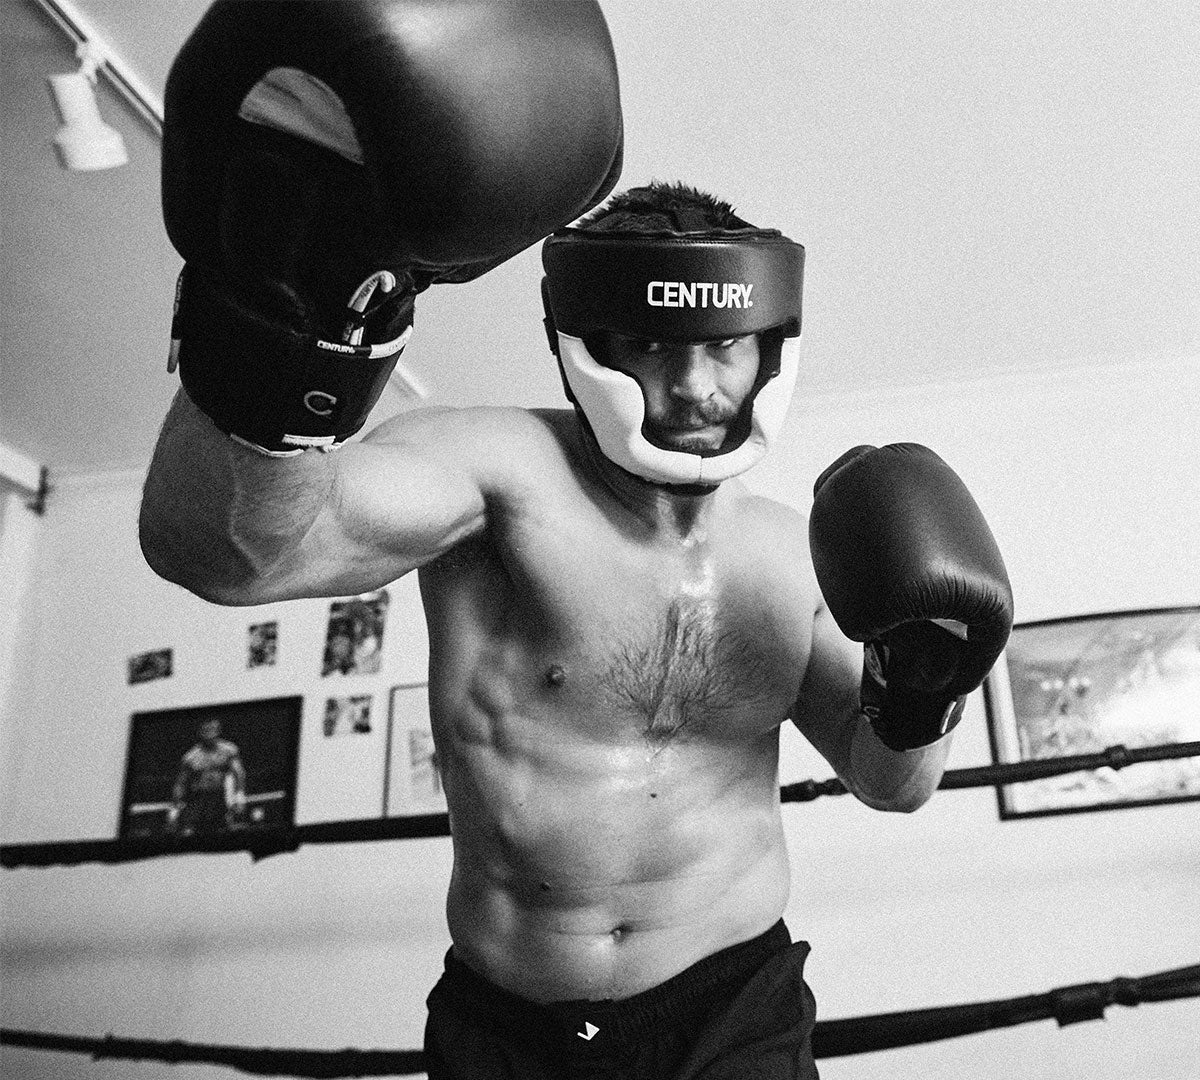 man boxing in black and white photo